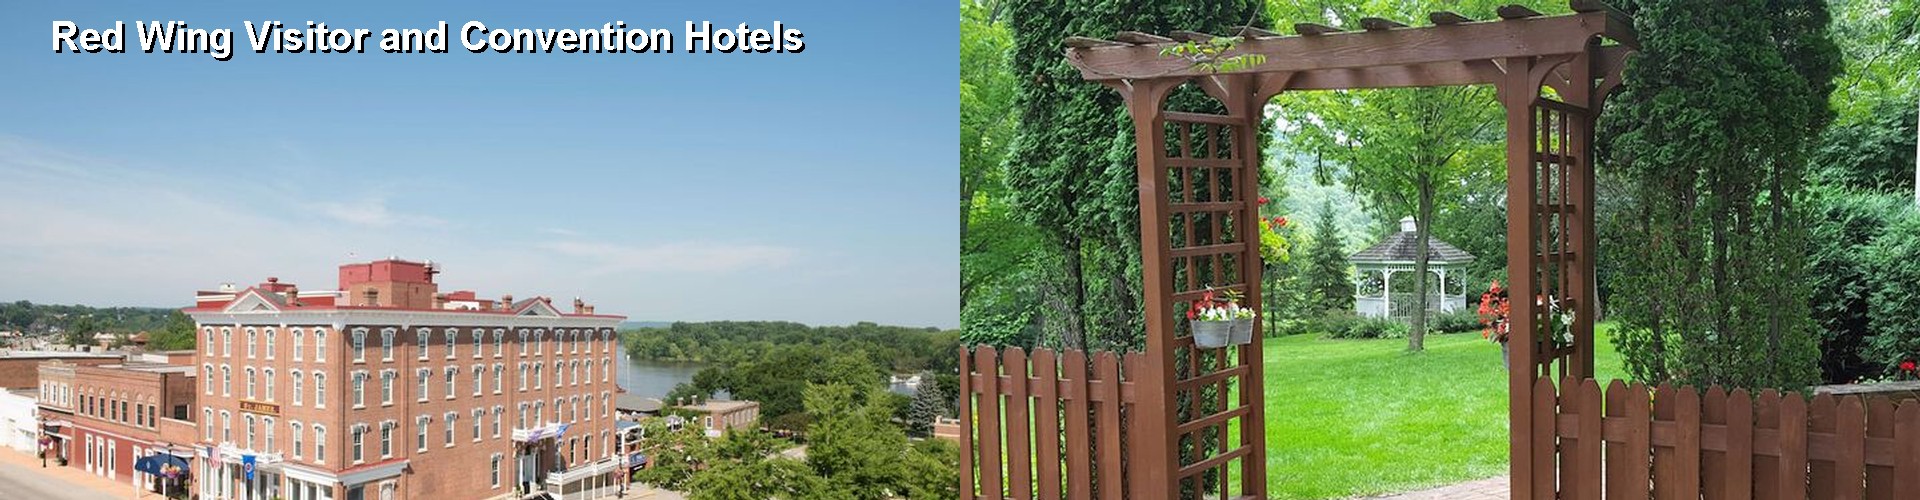 5 Best Hotels near Red Wing Visitor and Convention